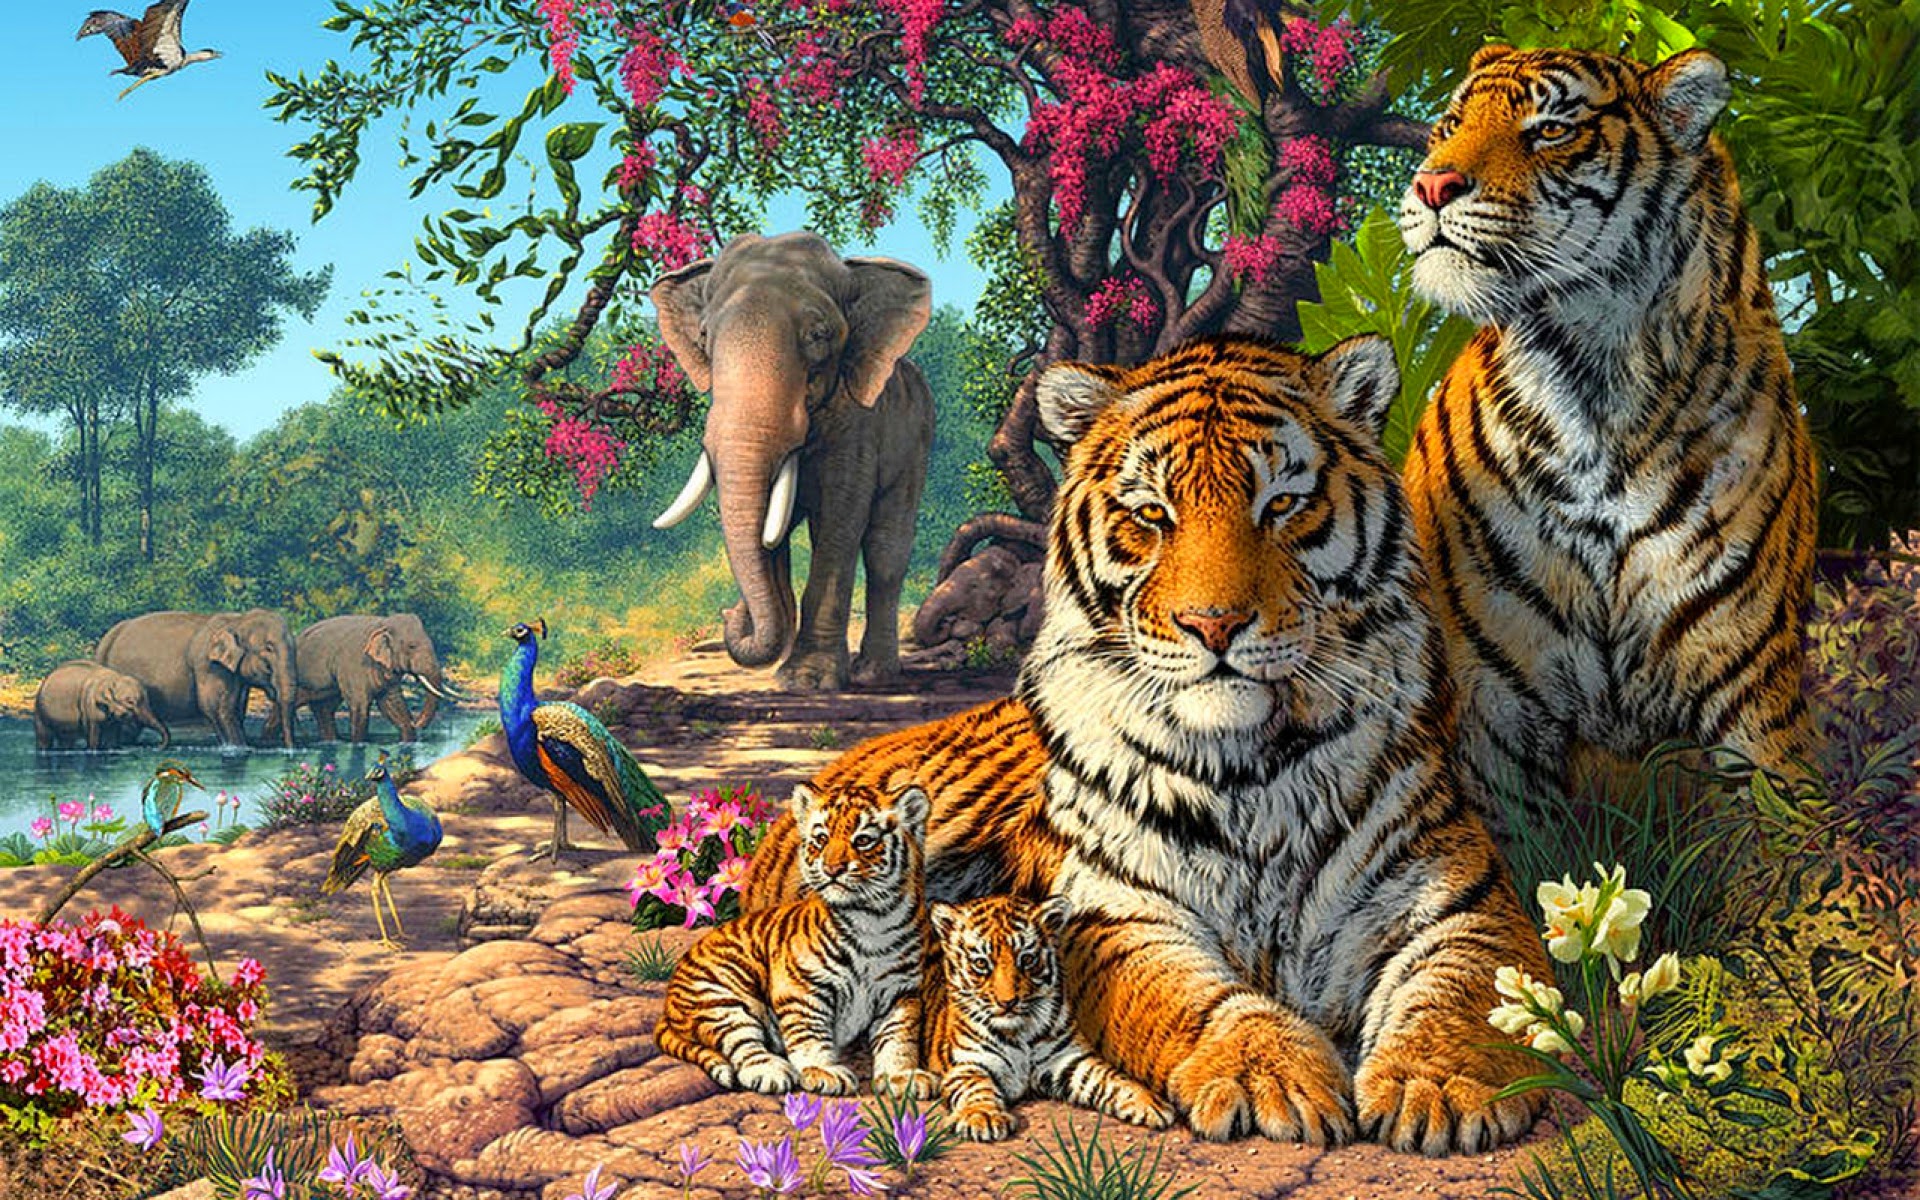 https://www.wallpapers13.com/wp-content/uploads/2017/09/Tigers-Family-Exotic-Birds-Paun-Elephants-Jungle-Nature-Hd-Wallpaper-for-Animal-Lovers-1920x1200.jpg